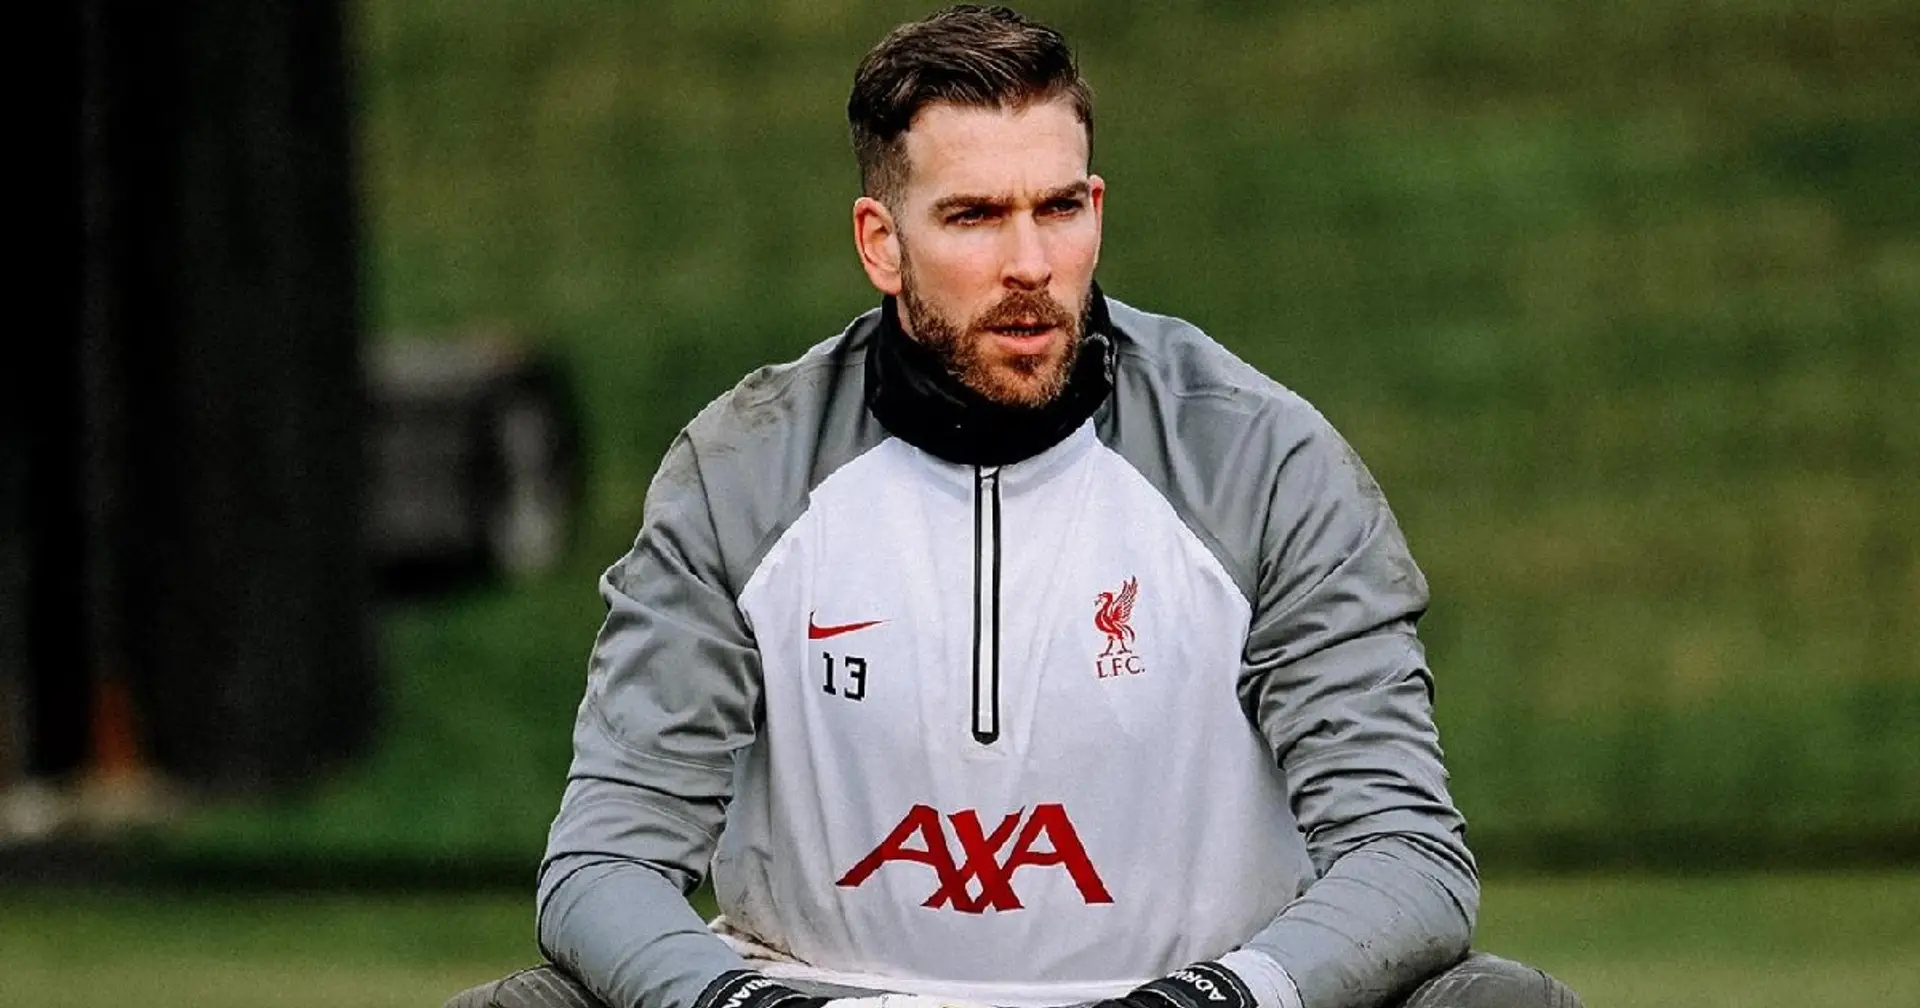 'I'm 36 now but I'm still learning': Adrian opens up on his contract extension